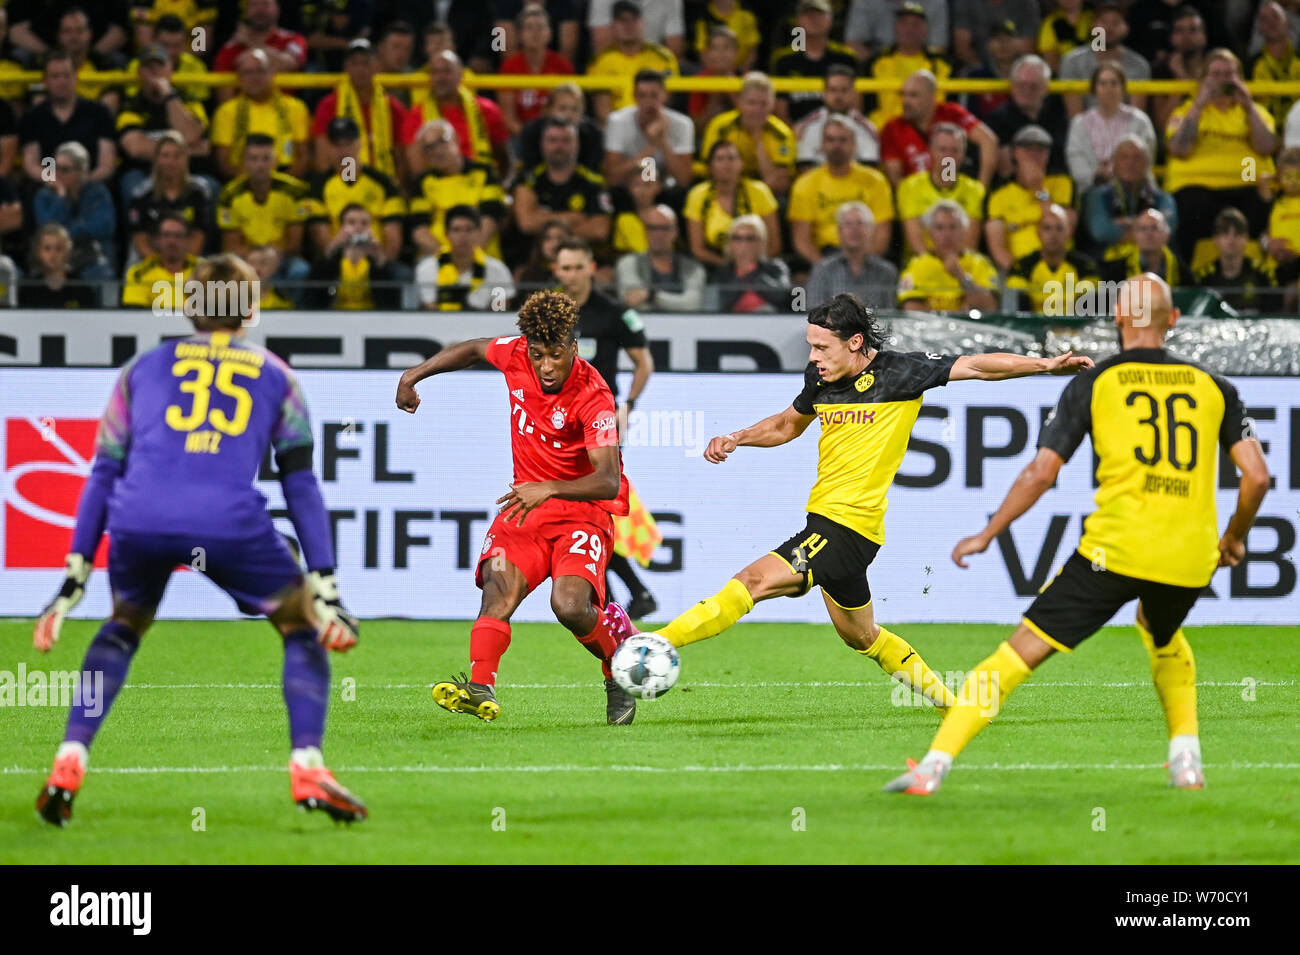 Kingsley Coman from Bayern Munich (L) and Nico Schulz from Borussia Dortmund (R) are seen in action during the Germany Supercup Final 2019 match between Borussia Dortmund and Bayern Munich.(Final score: Borussia Dortmund 2:0 Bayern Munich) Stock Photo